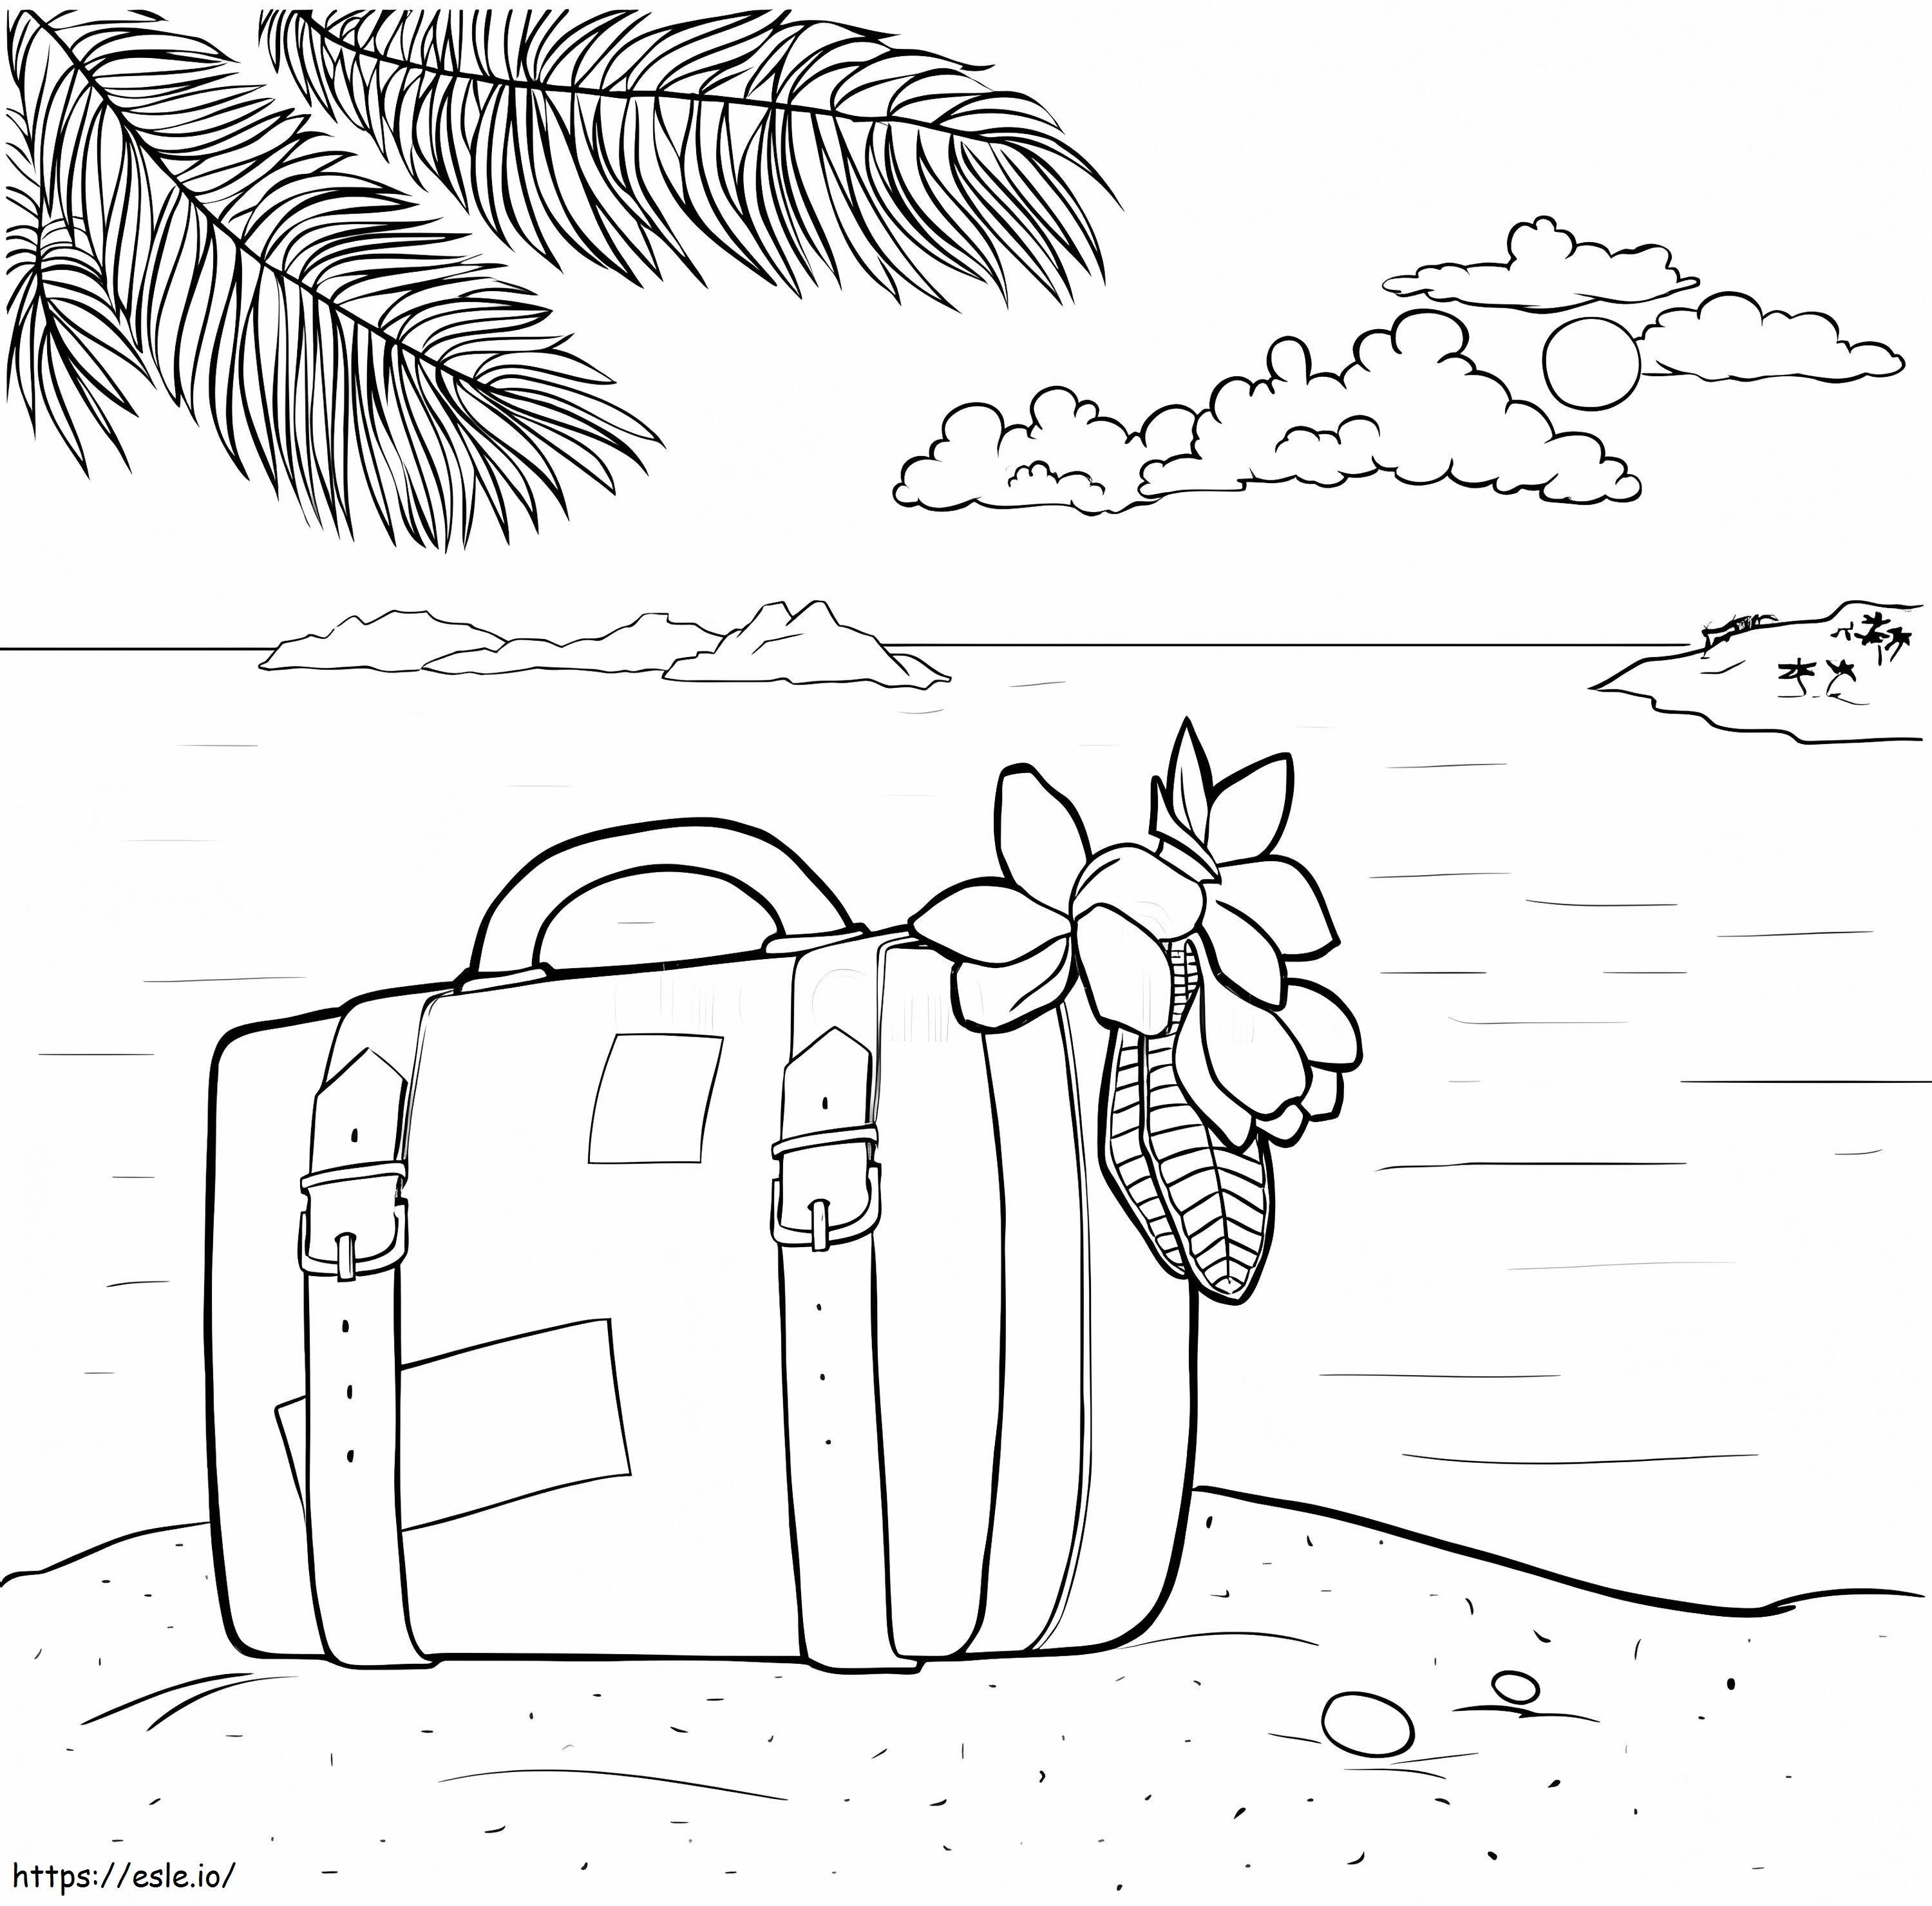 Suitcase With Plumeria On The Beach coloring page